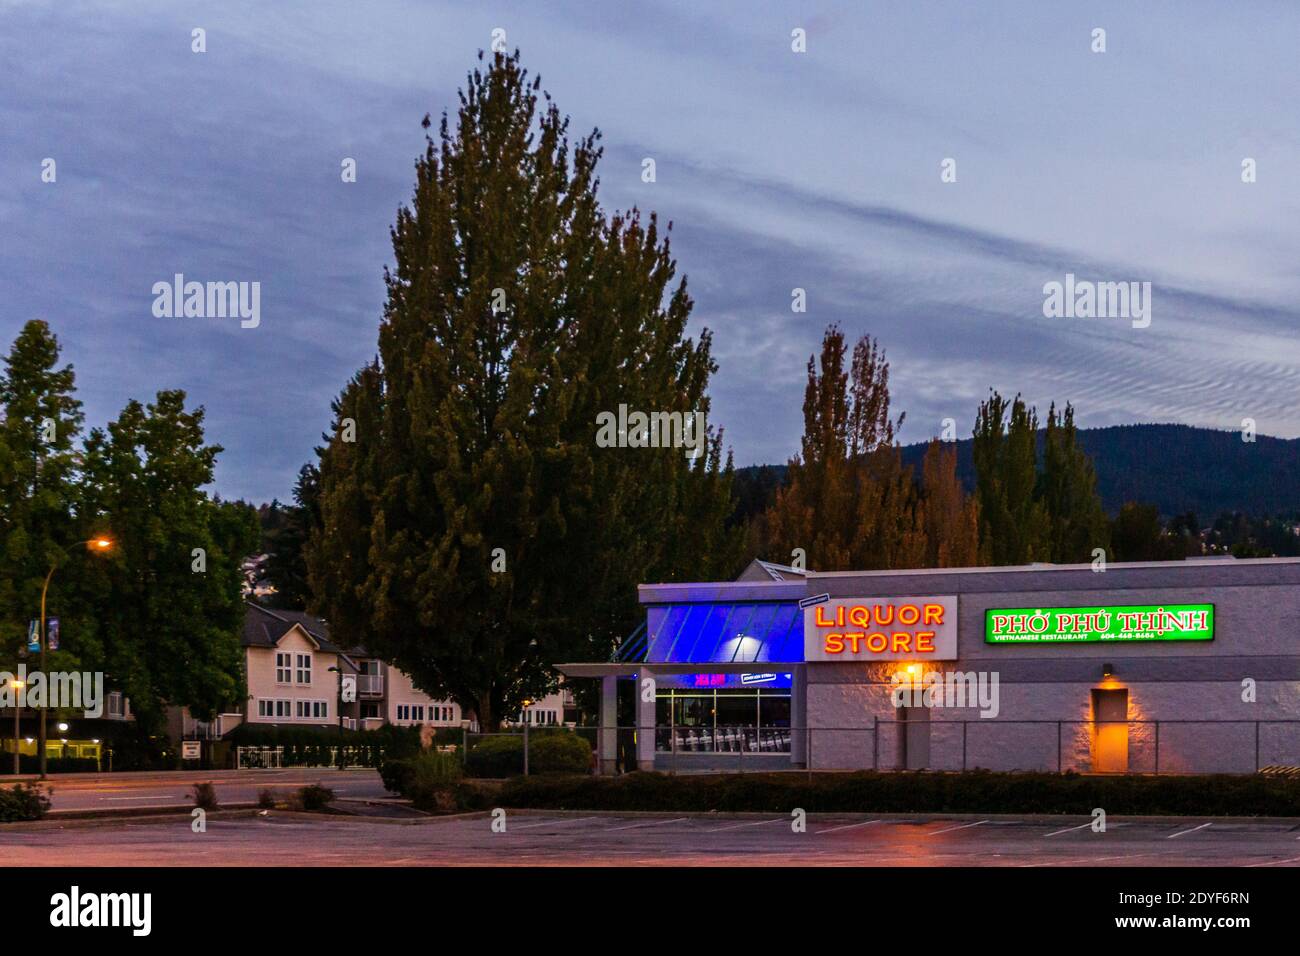 COQUITLAM, CANADA - OCTOBER 01, 2019: liquor store and other stores Coquitlam Centre Shopping Mall Stock Photo